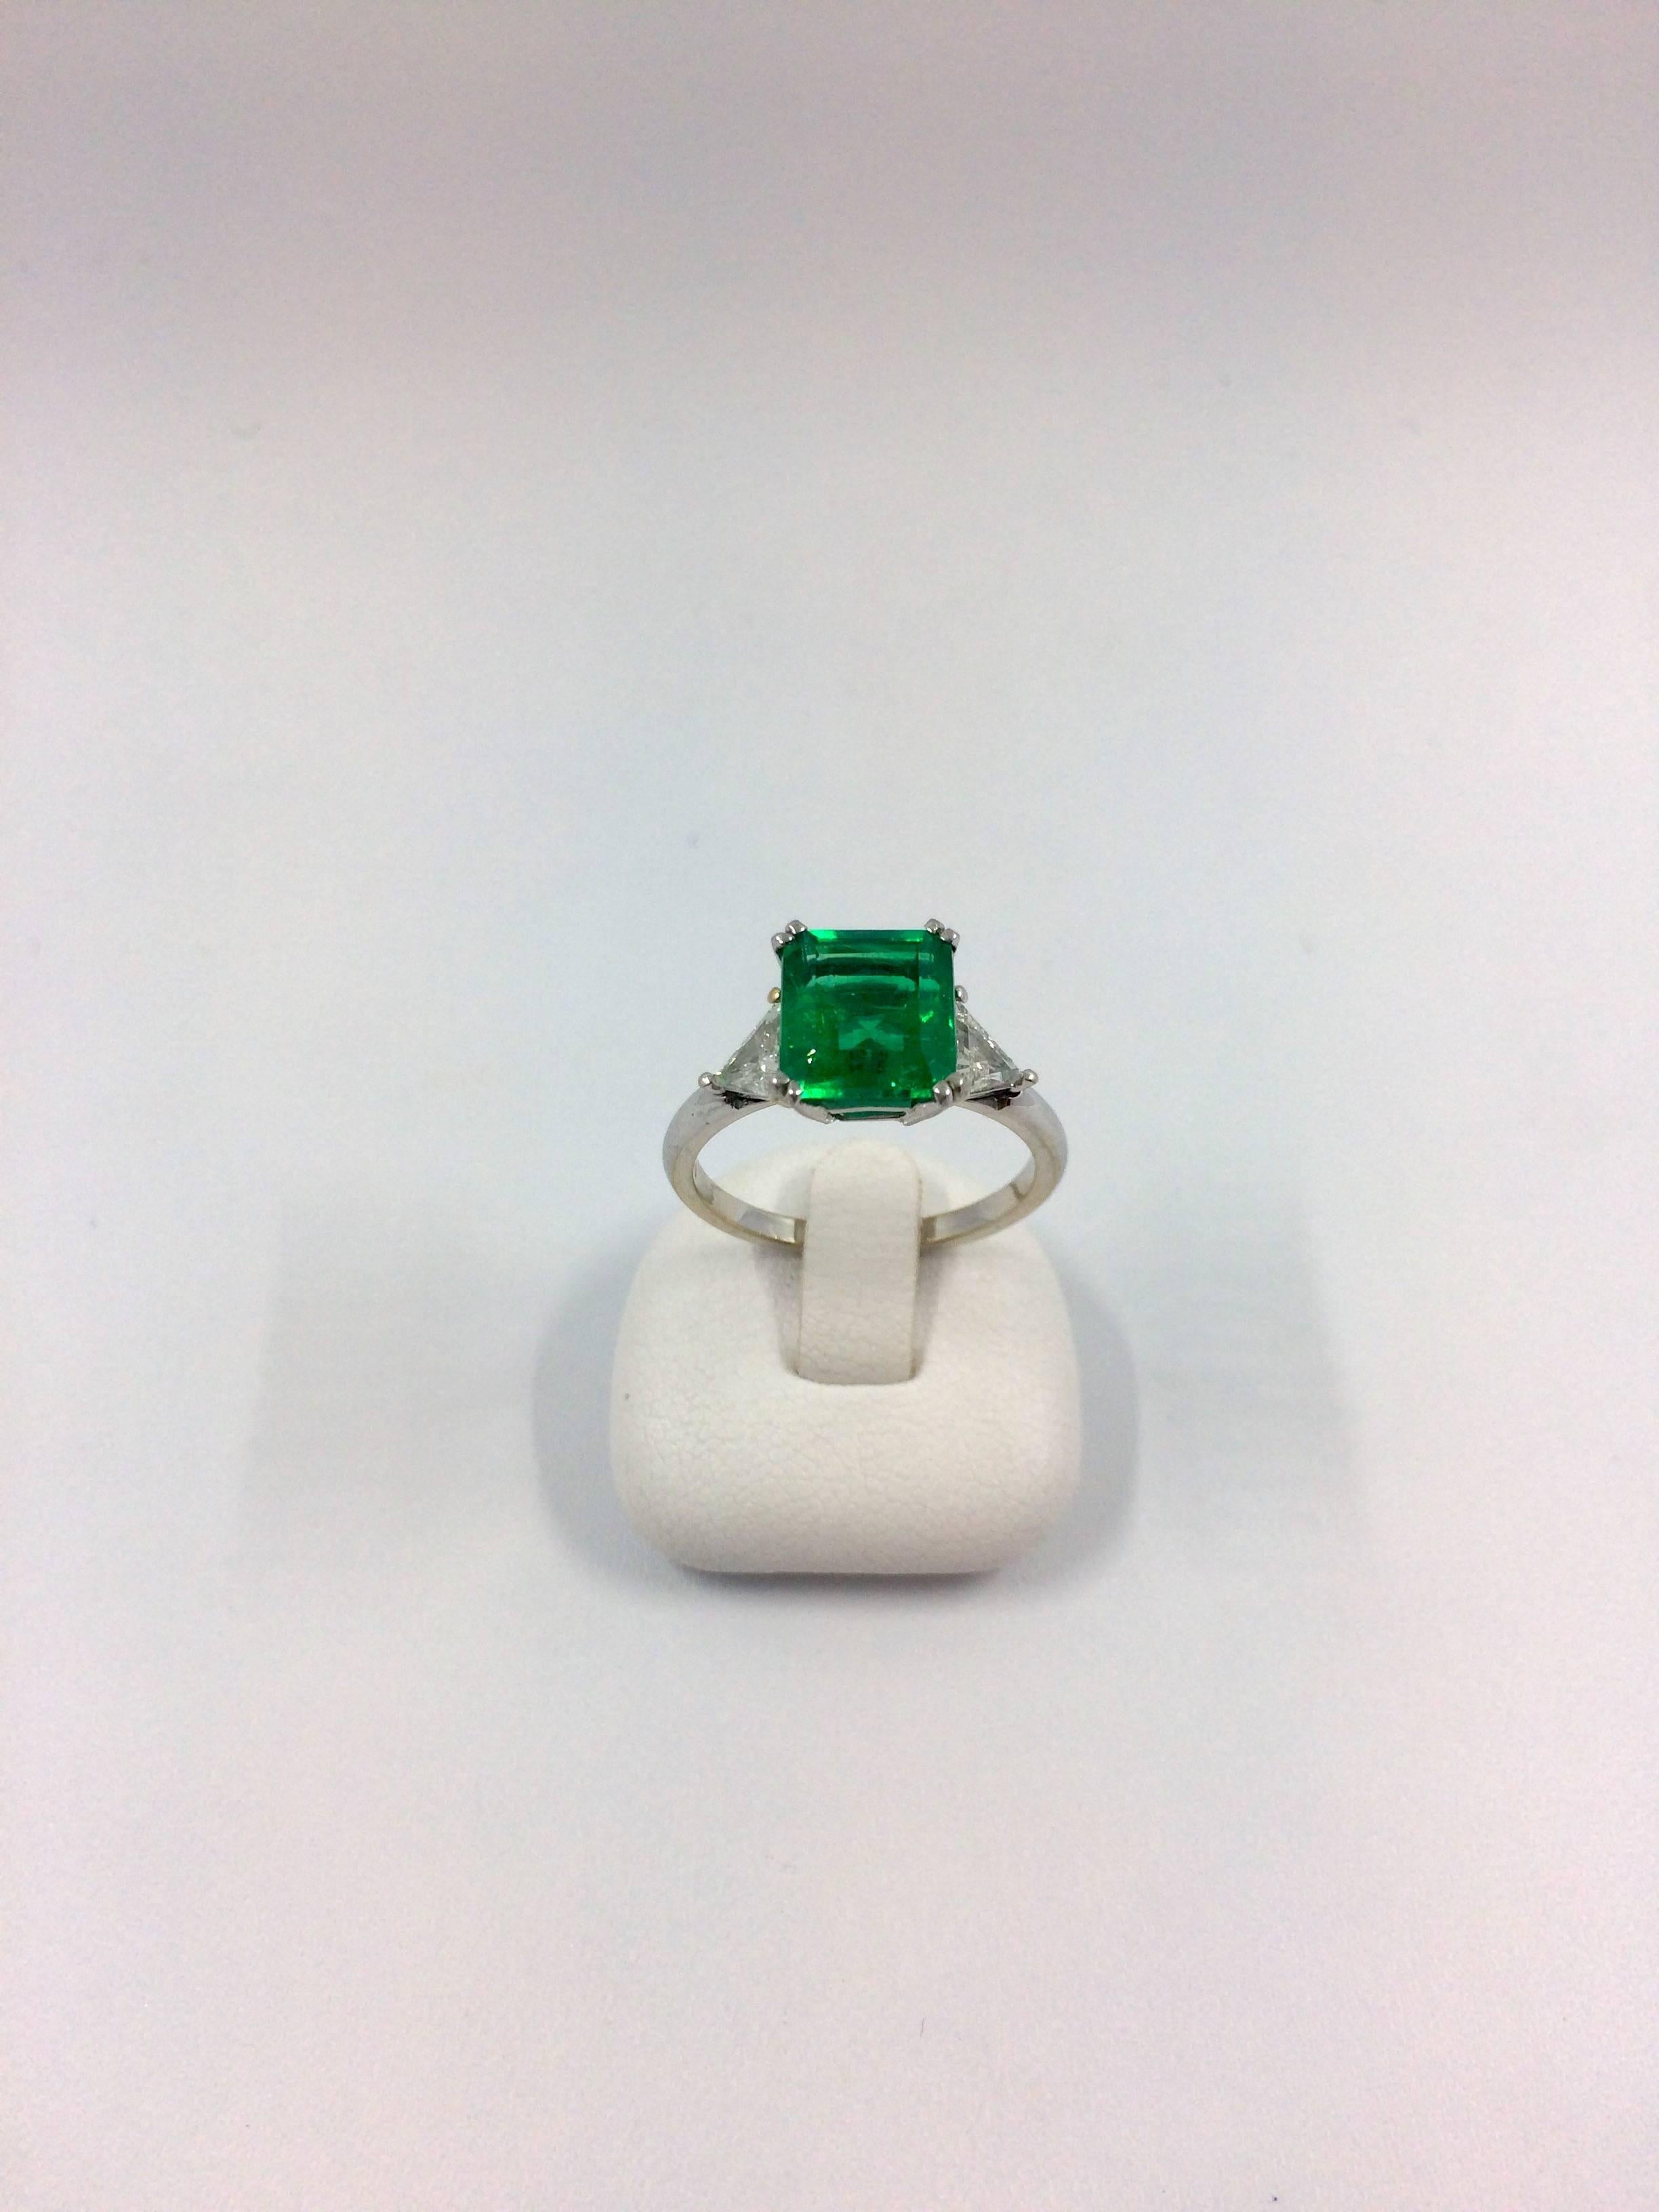 A white gold ring set in the middle with a 2.79 carat square colombian emerald. The emerald is flanked by two trillium cut diamonds.
- Emerald Weight: 2.79 carat
- Emerald Quality: no resin
- Total Diamond Weight: 0.49 carat
- Diamonds Quality: